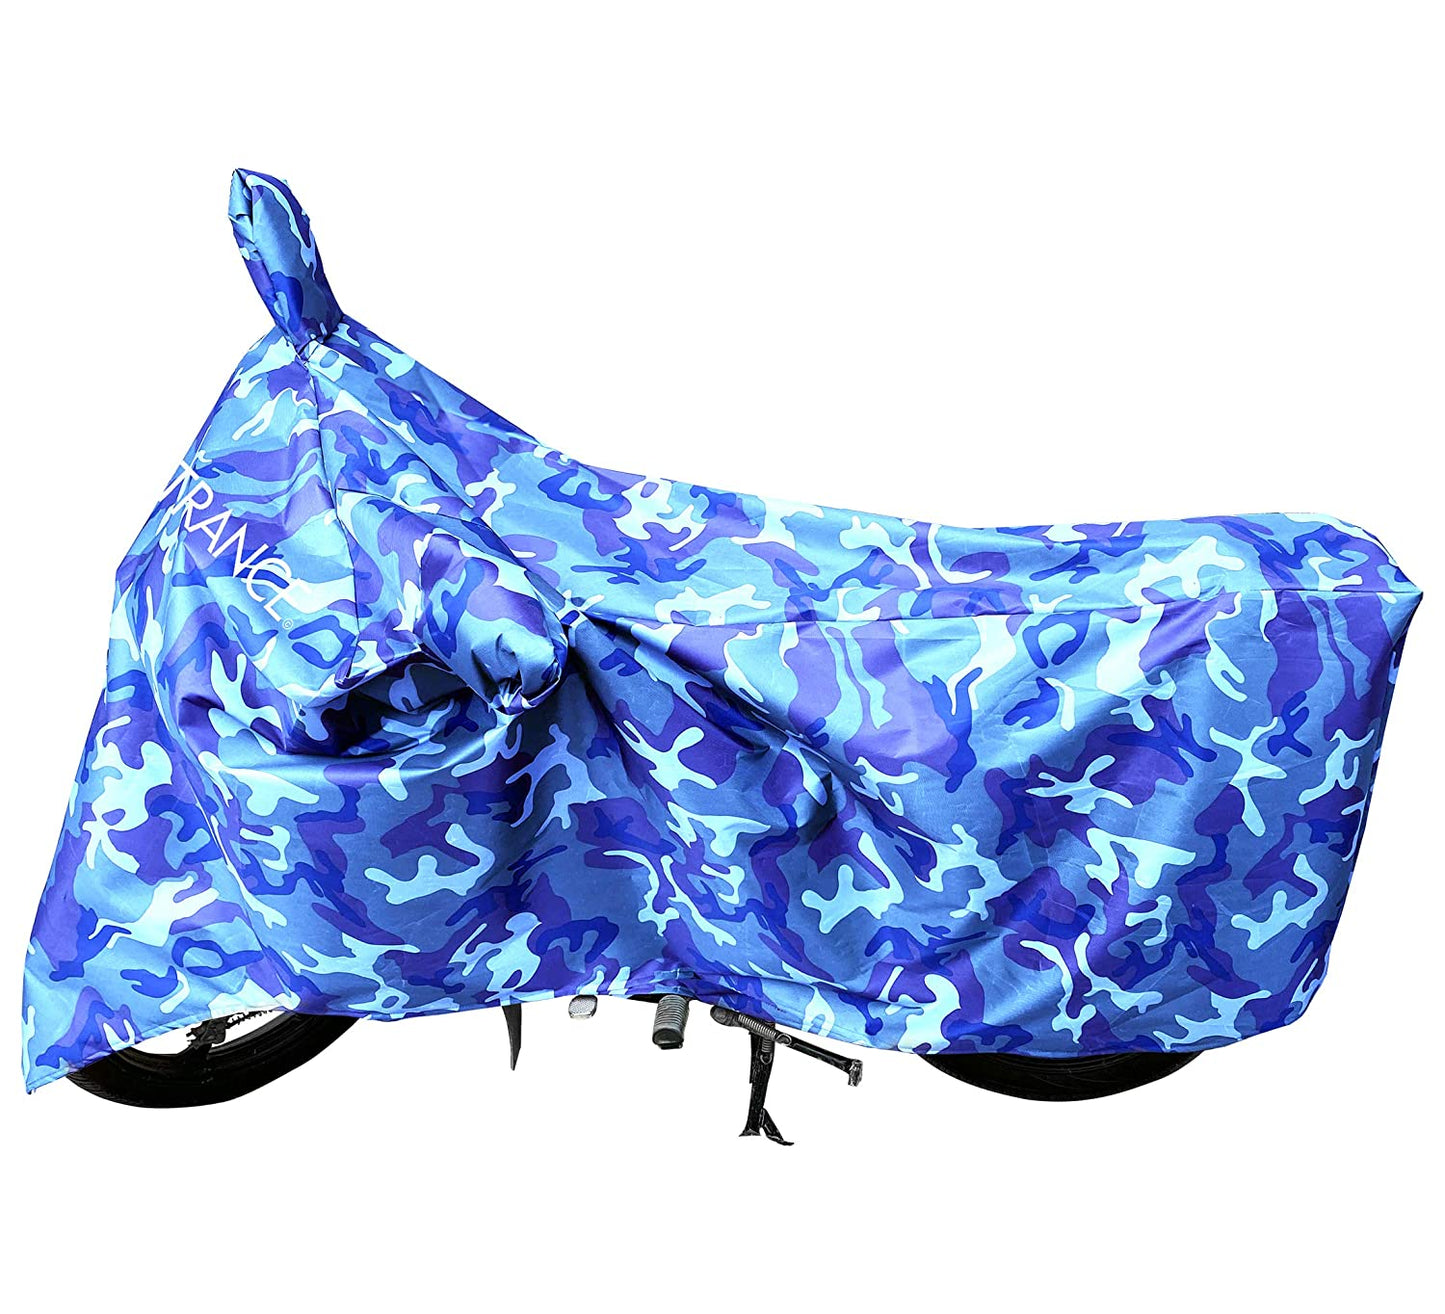 MotoTrance Jungle Bike Body Covers For Yamaha Enticer - Interlock-Stitched Waterproof and Heat Resistant with Mirror Pockets